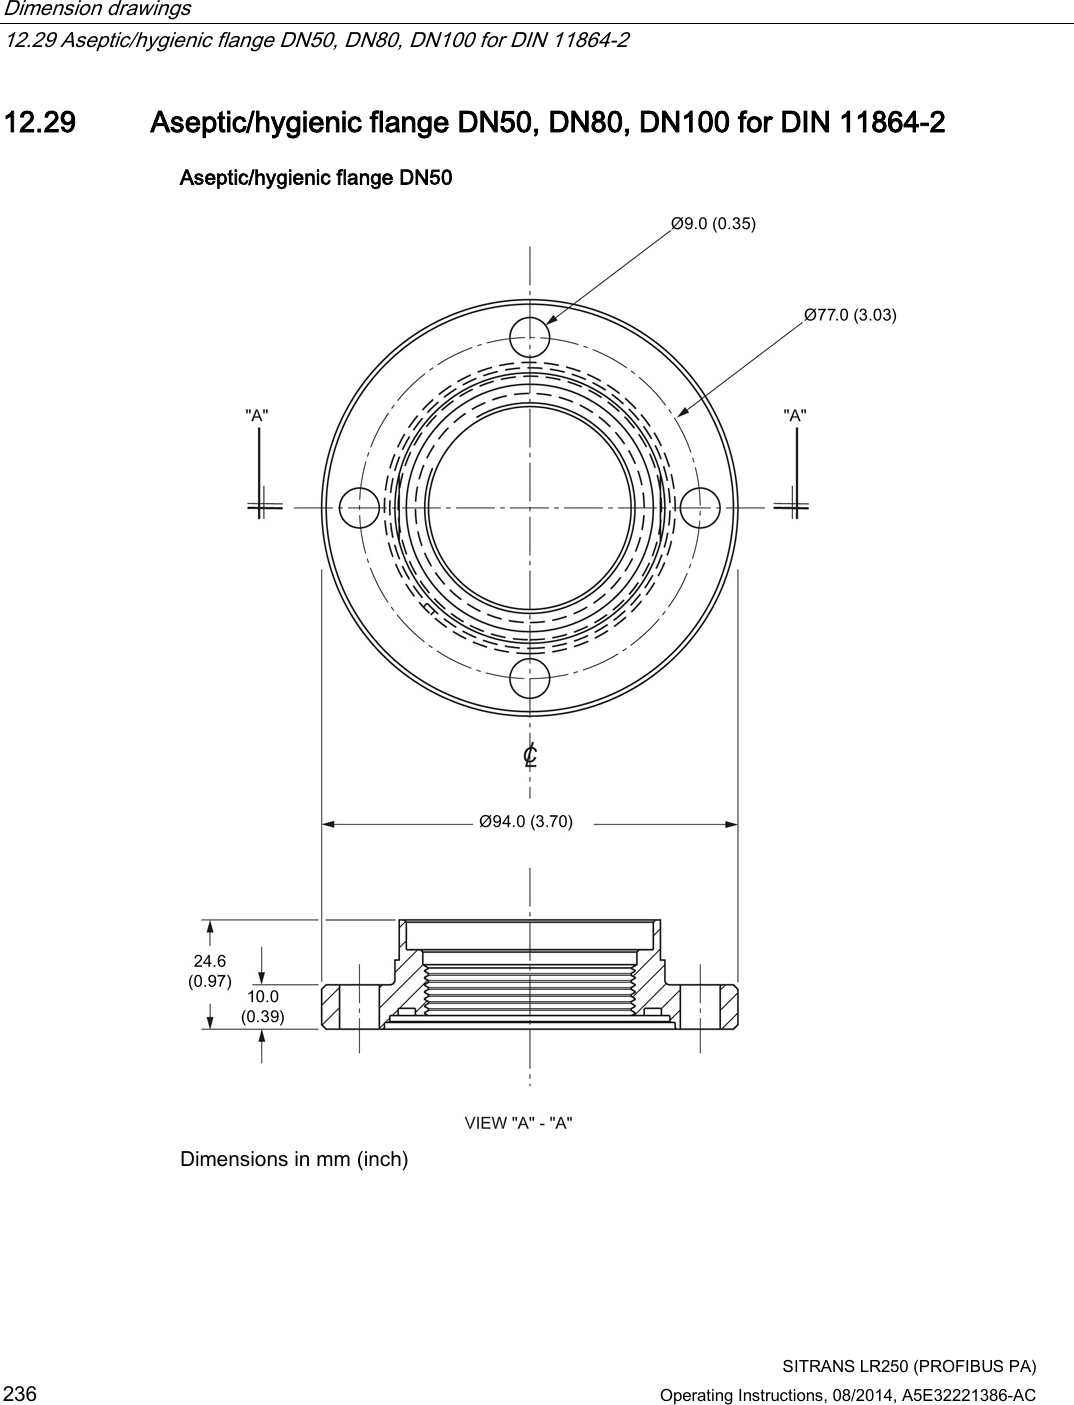 Dimension drawings   12.29 Aseptic/hygienic flange DN50, DN80, DN100 for DIN 11864-2  SITRANS LR250 (PROFIBUS PA) 236 Operating Instructions, 08/2014, A5E32221386-AC 12.29 Aseptic/hygienic flange DN50, DN80, DN100 for DIN 11864-2 Aseptic/hygienic flange DN50  Dimensions in mm (inch) 